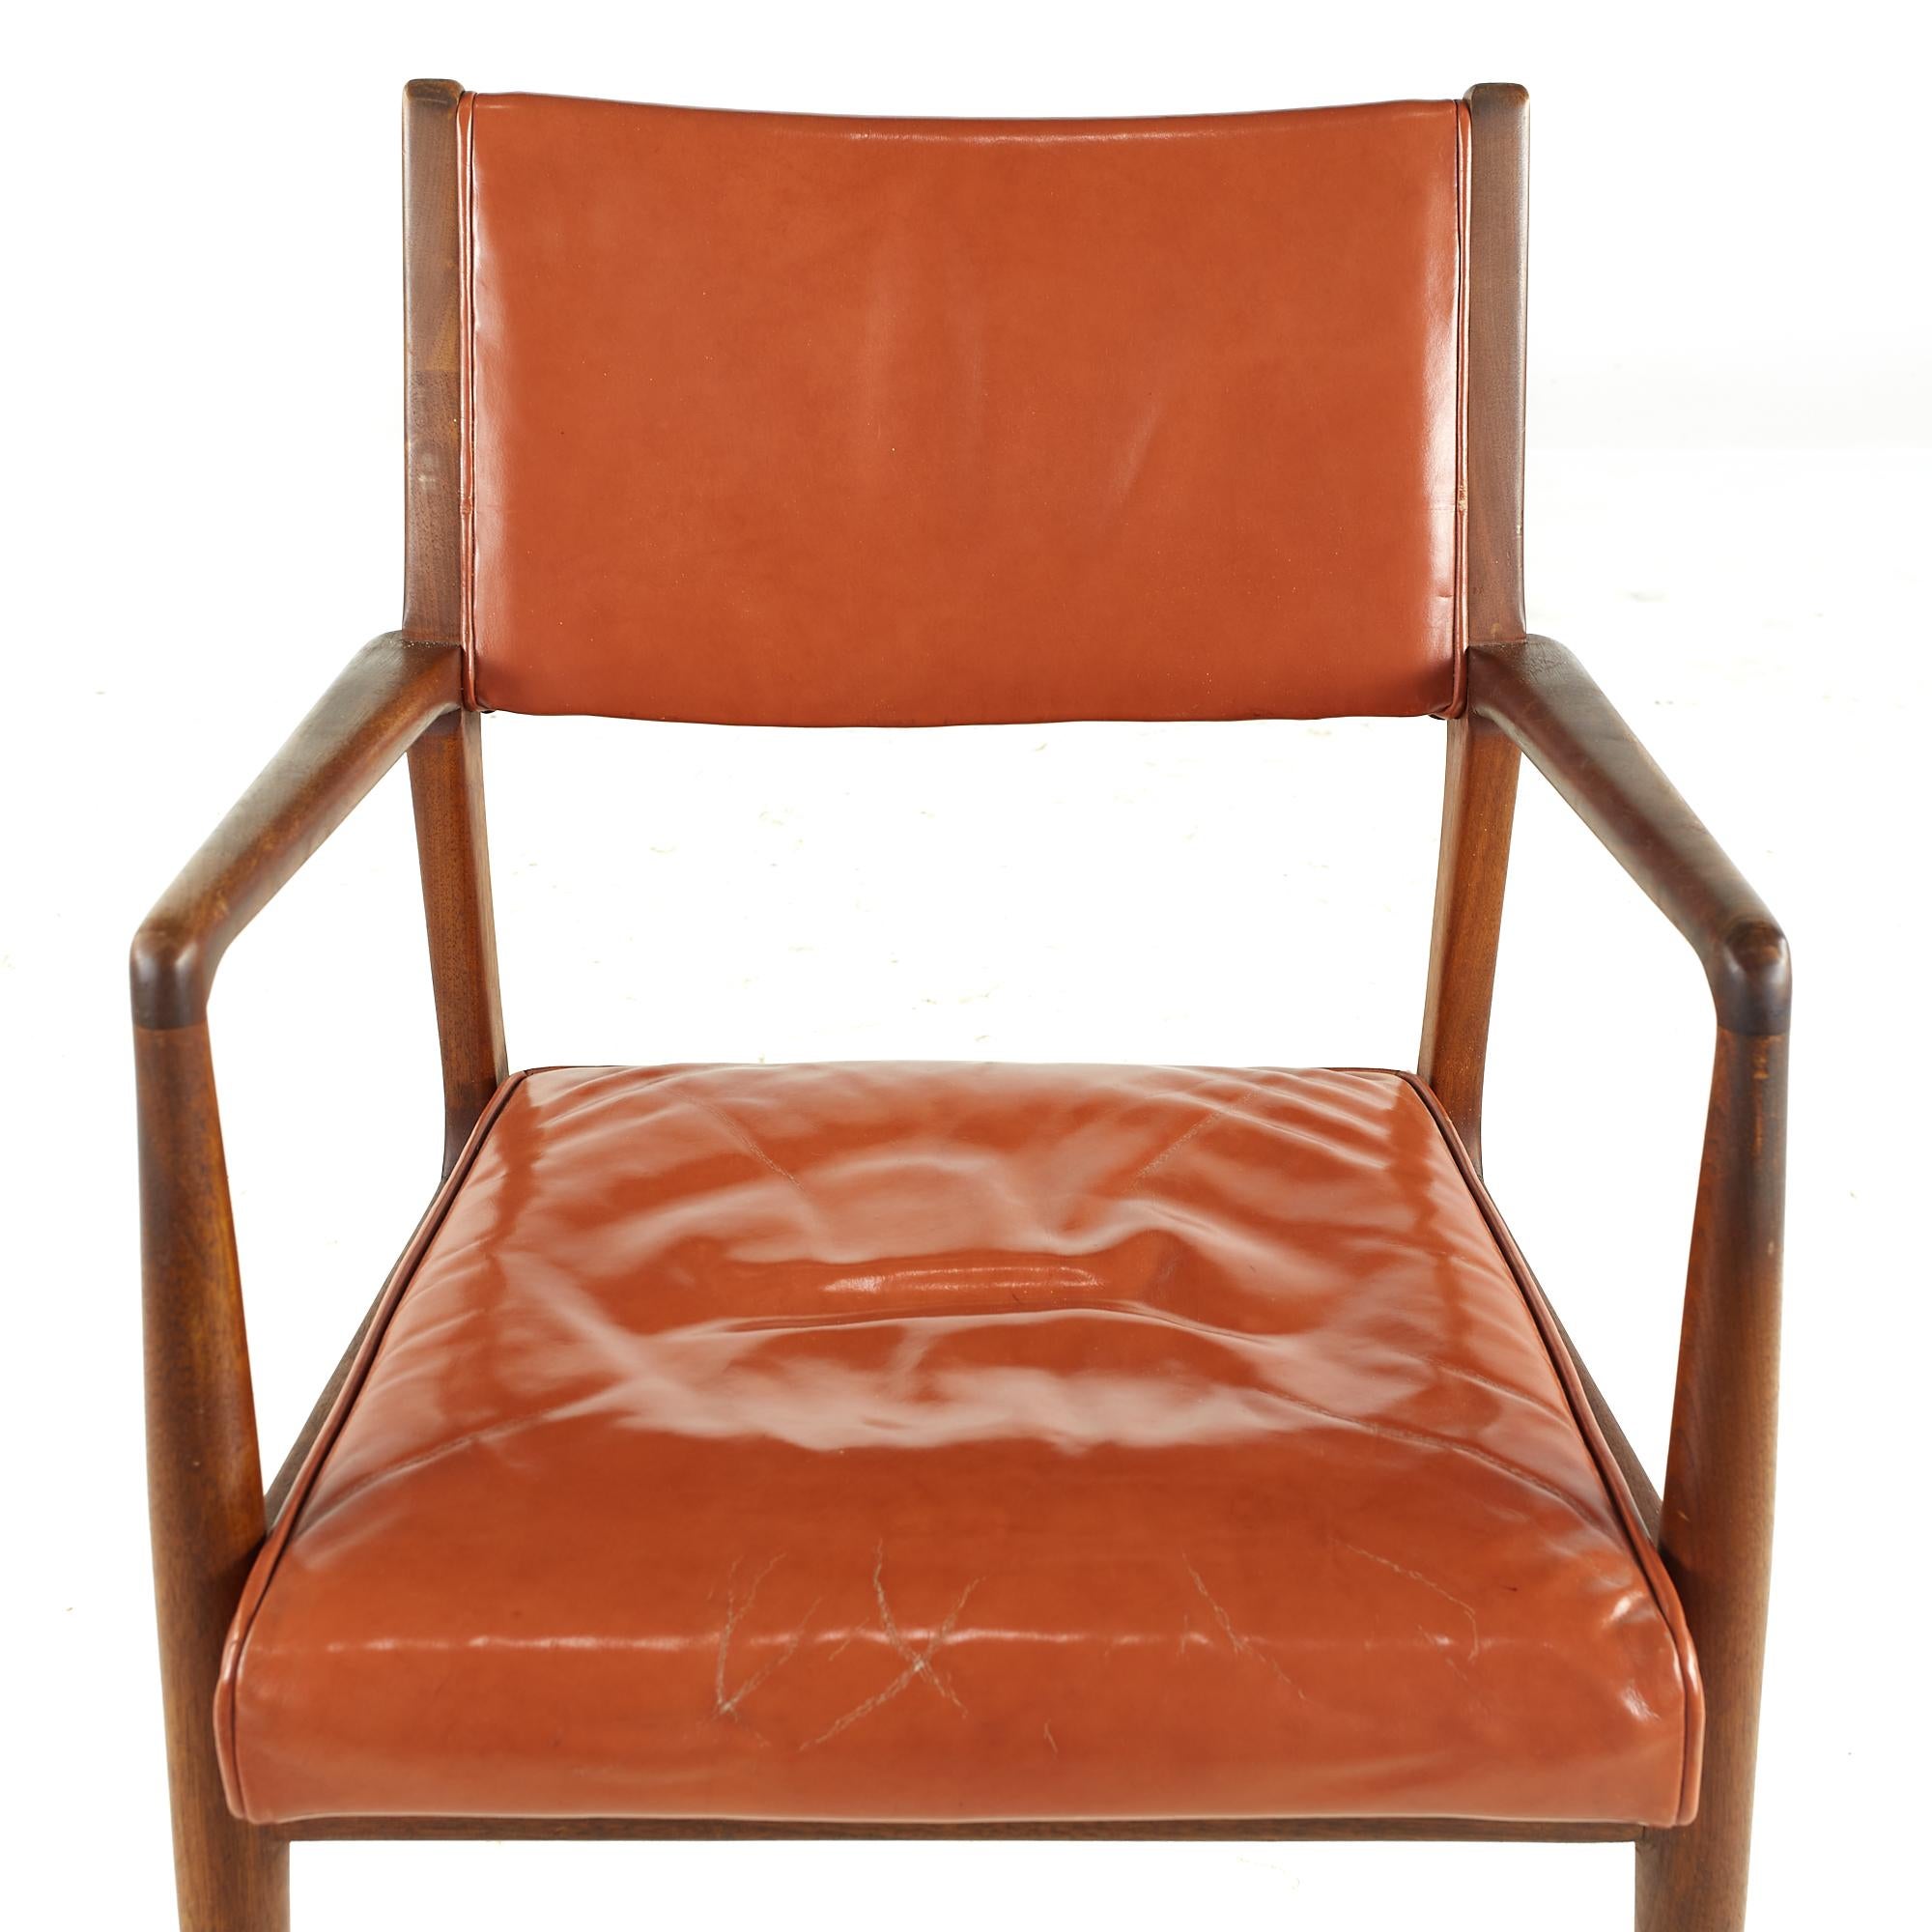 Stow Davis Midcentury Walnut and Brass Lounge Chair For Sale 3